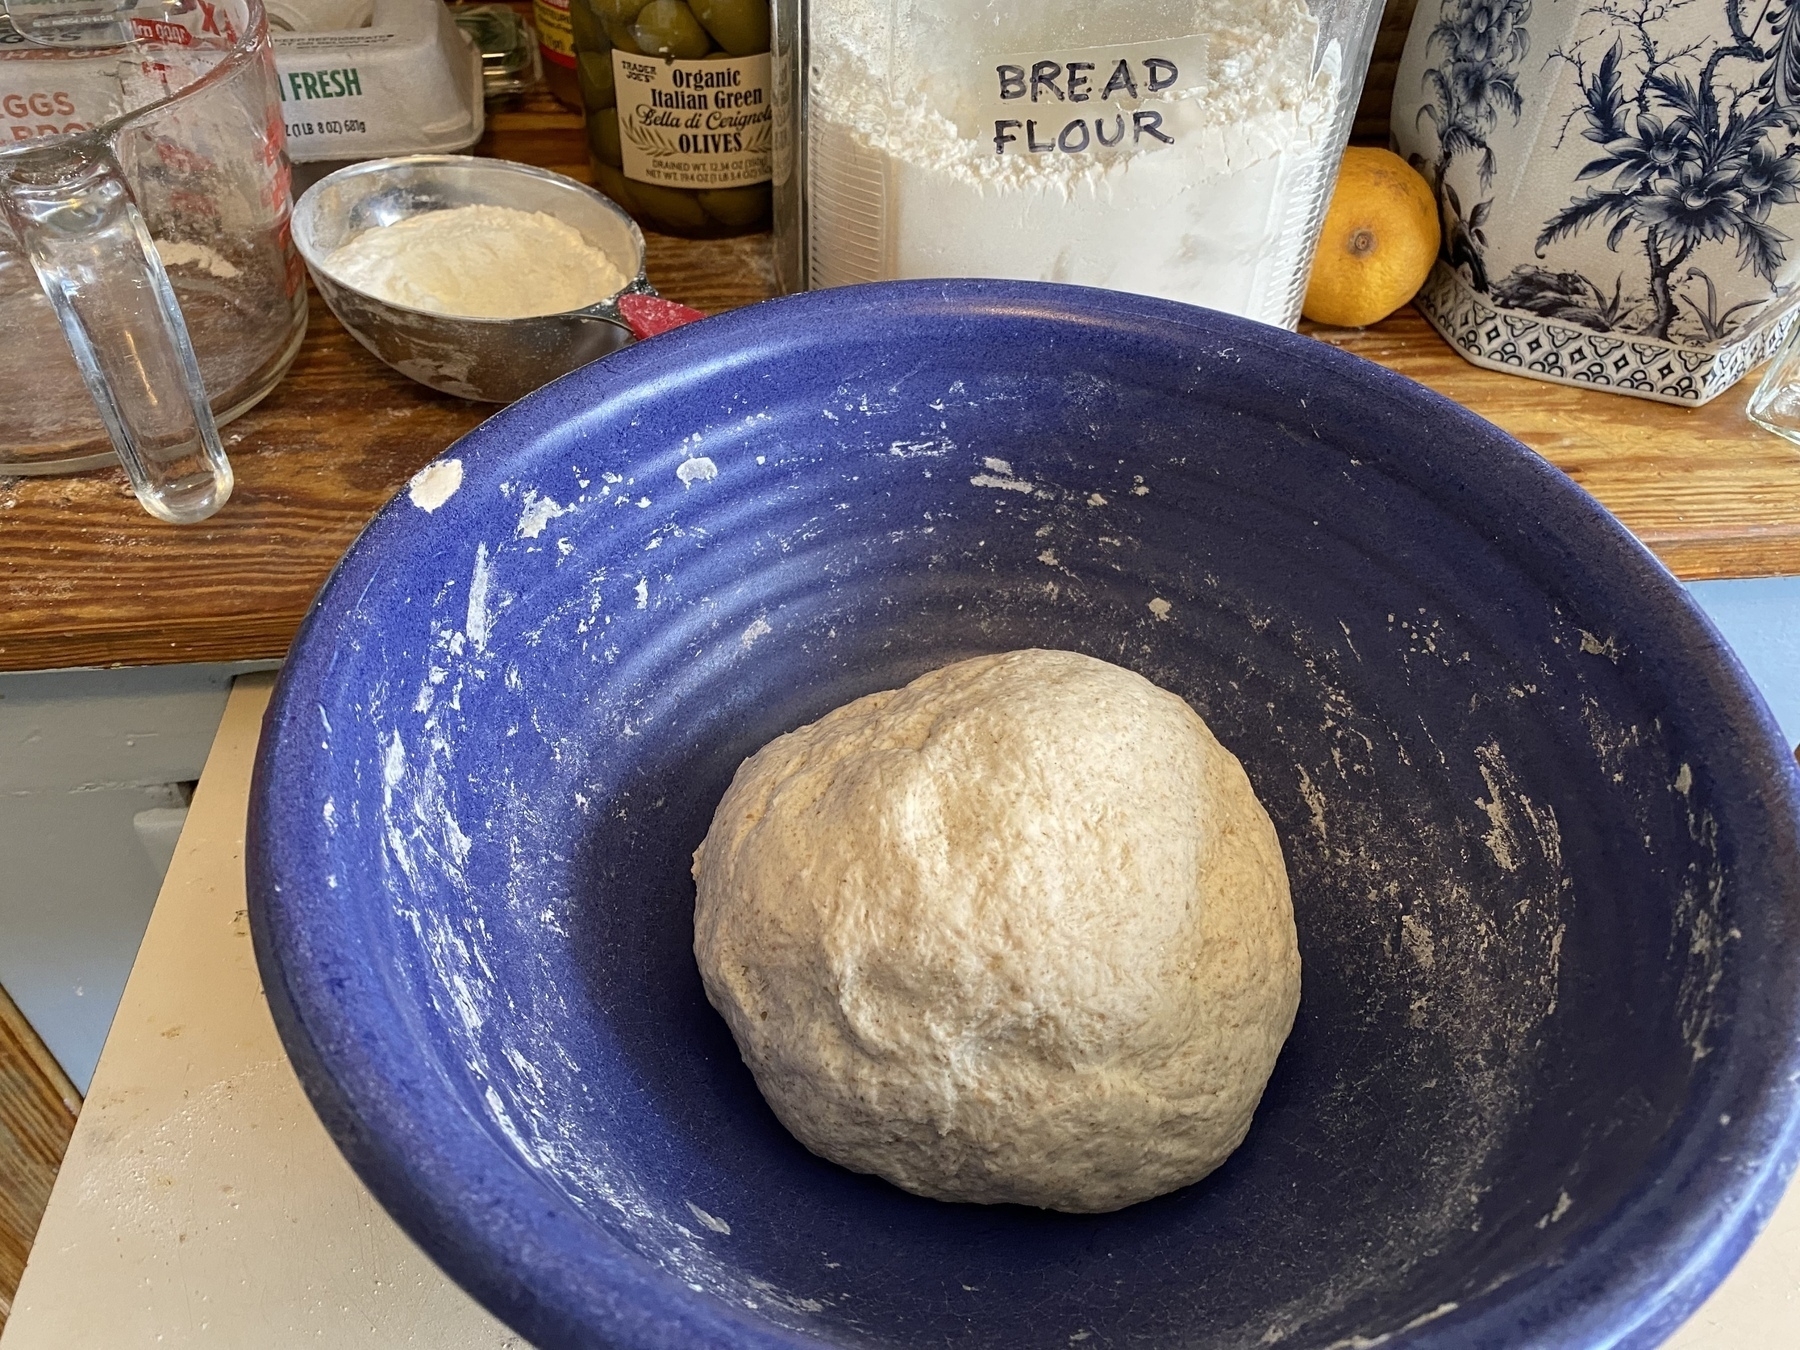 Close up of a dough ball in a blue bowl, with a jar of flour and a lemon on the shelf behind.